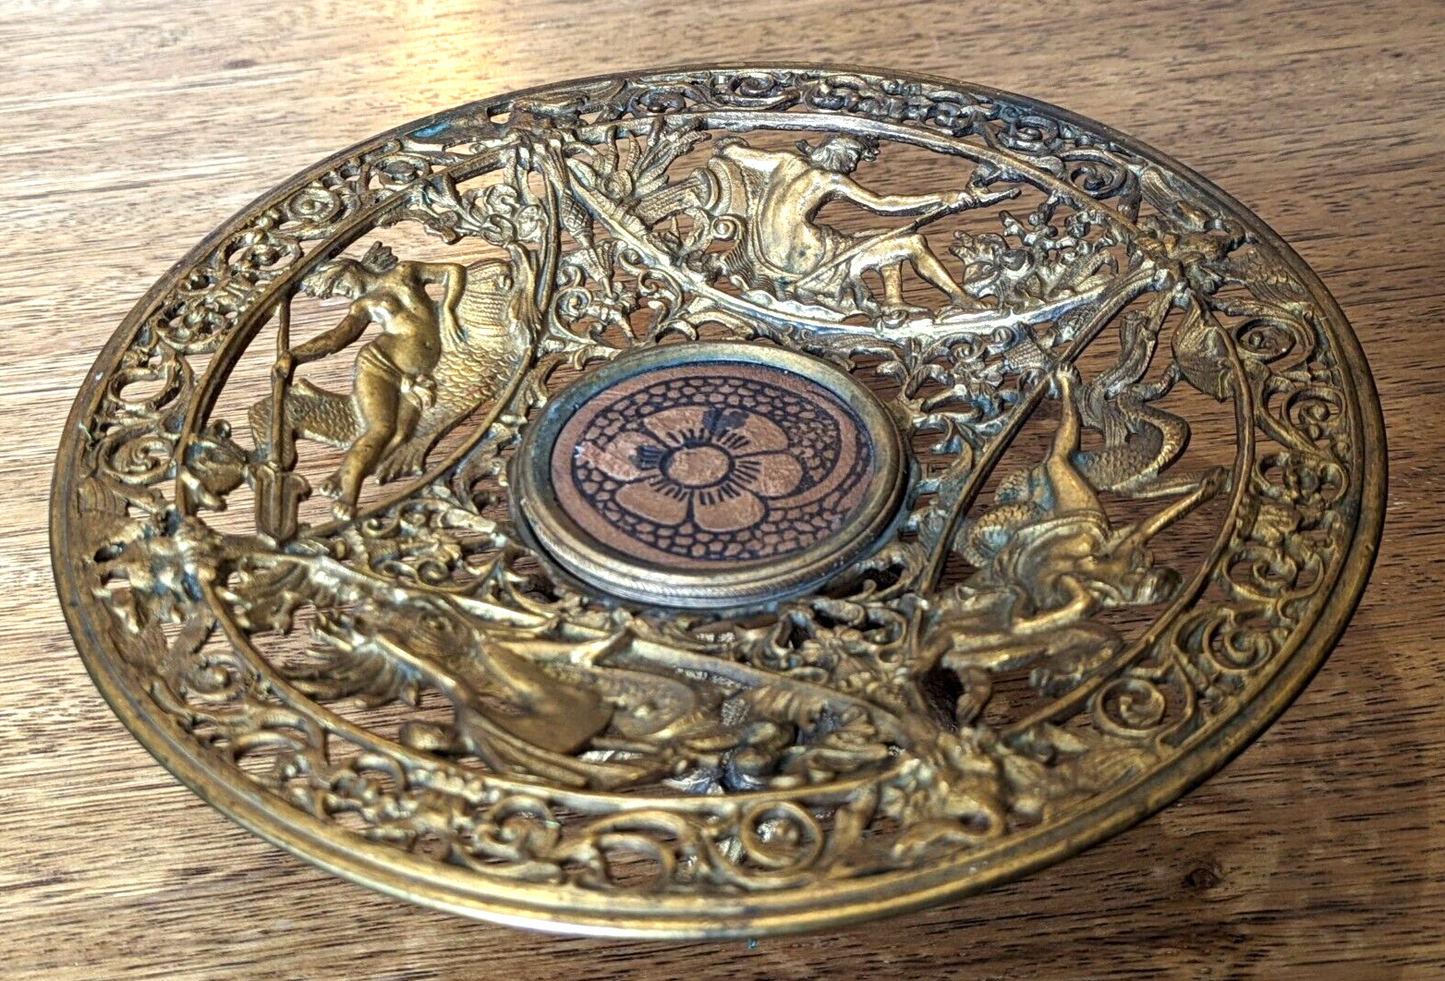 Antique Gilt Brass Mythological Classical Tazza Dish Compote Plate Coalbrookdale